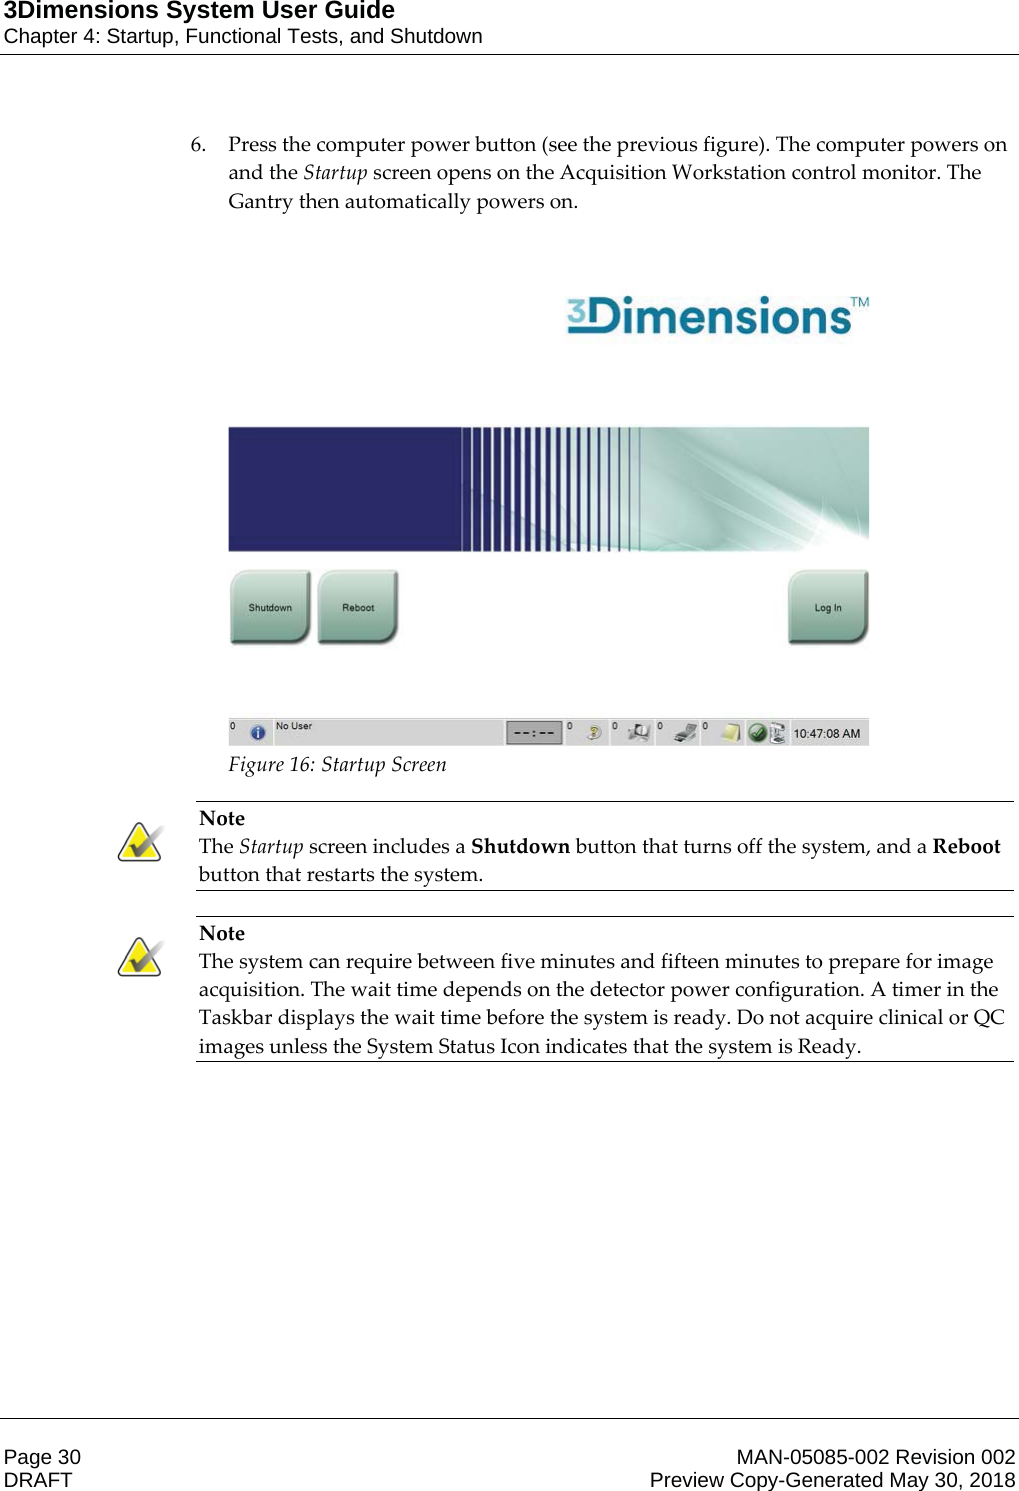 3Dimensions System User GuideChapter 4: Startup, Functional Tests, and ShutdownPage 30 MAN-05085-002 Revision 002  DRAFT Preview Copy-Generated May 30, 20186. Press the computer power button (see the previous figure). The computer powers on and the Startup screen opens on the Acquisition Workstation control monitor. The Gantry then automatically powers on.  Figure 16: Startup Screen    Note The Startup screen includes a Shutdown button that turns off the system, and a Reboot button that restarts the system.    Note The system can require between five minutes and fifteen minutes to prepare for image acquisition. The wait time depends on the detector power configuration. A timer in the Taskbar displays the wait time before the system is ready. Do not acquire clinical or QC images unless the System Status Icon indicates that the system is Ready.    